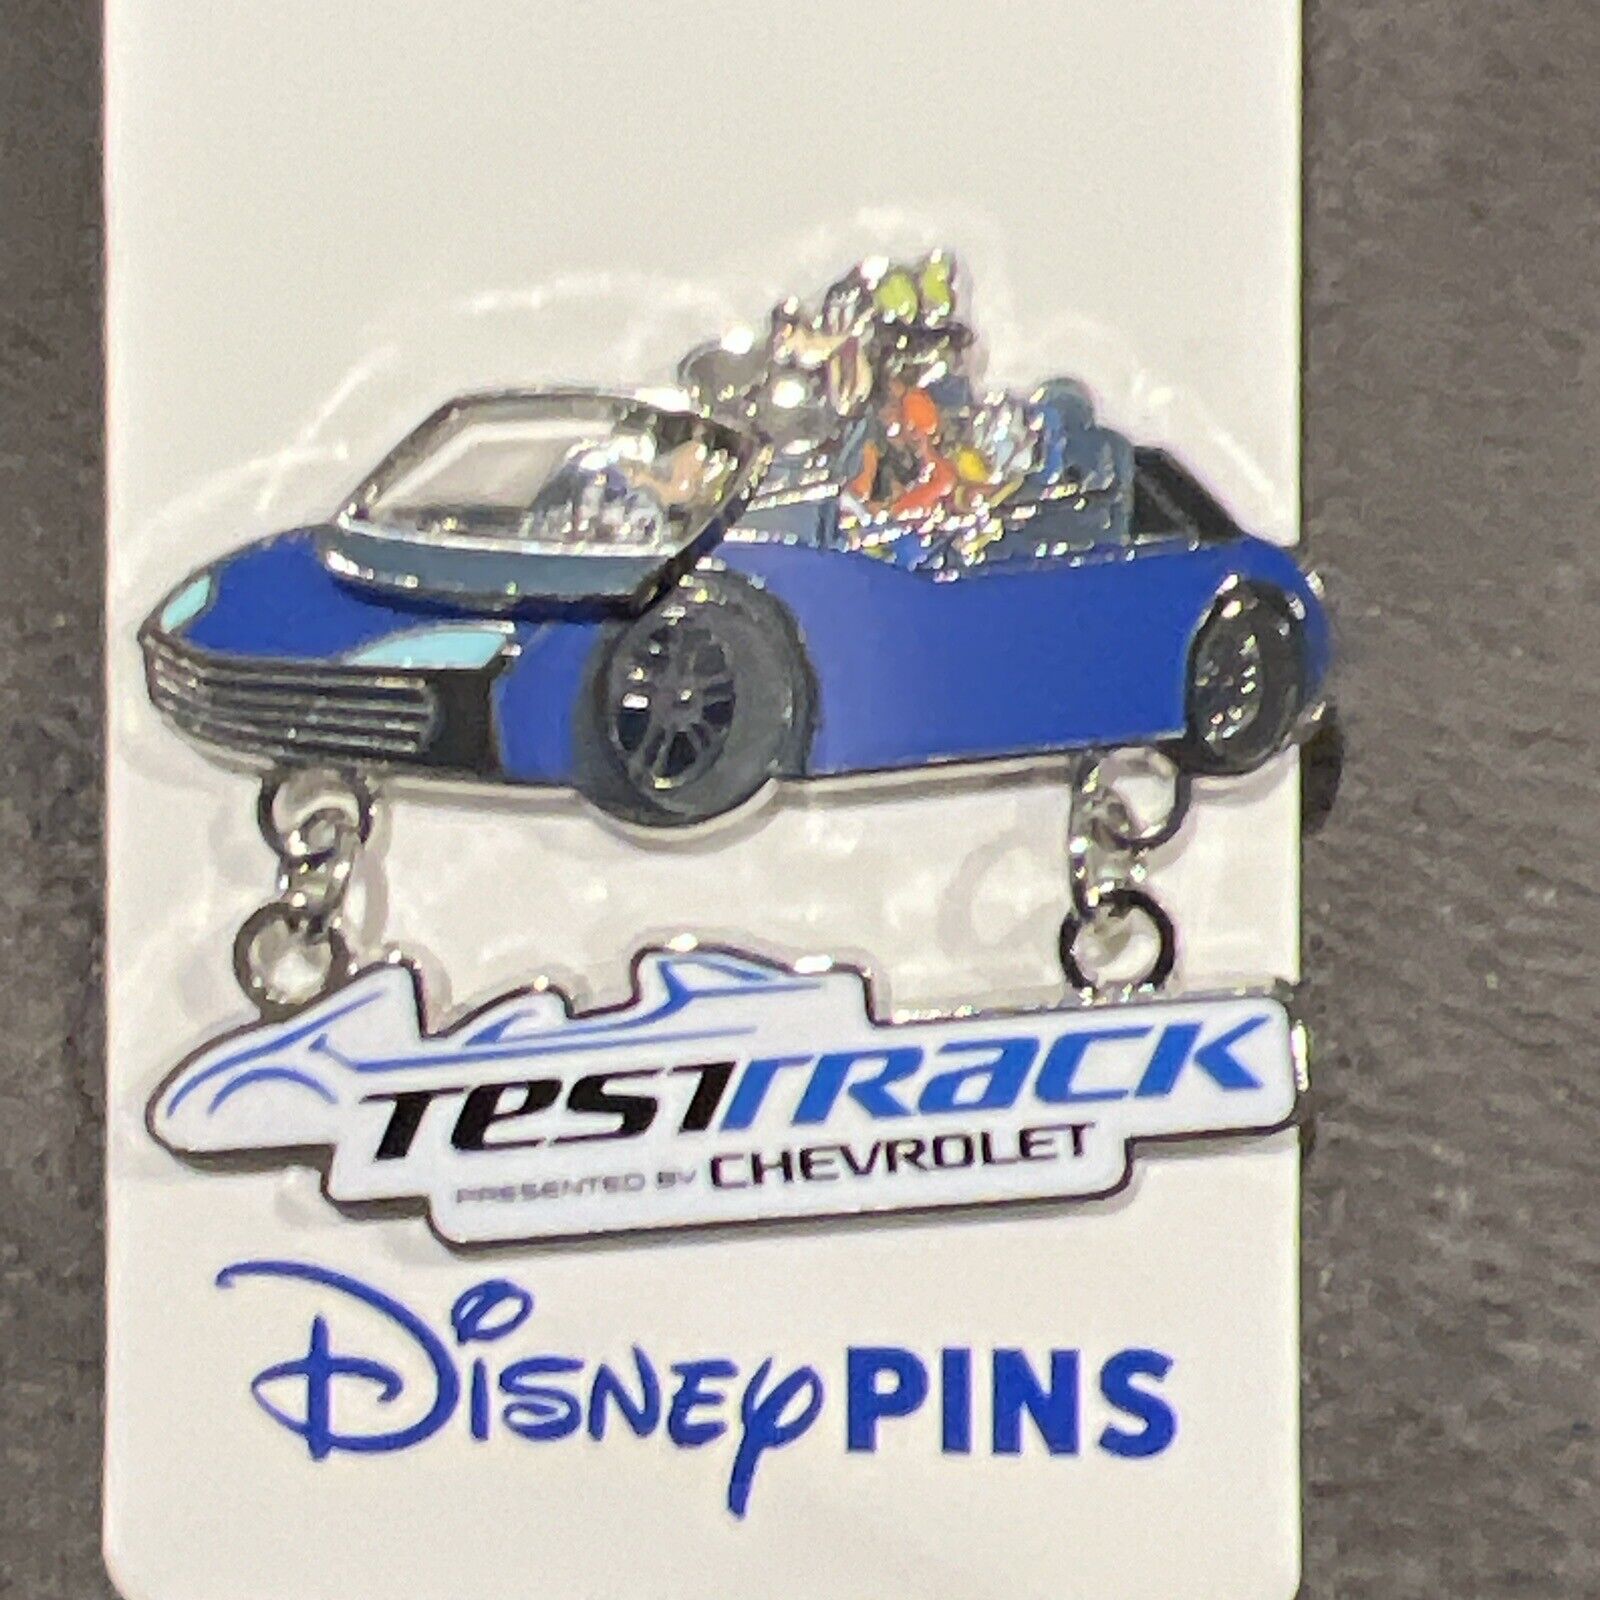 Disney Parks Pin - WDW Attractions Test Track Car Mickey Driving Goofy & Donald